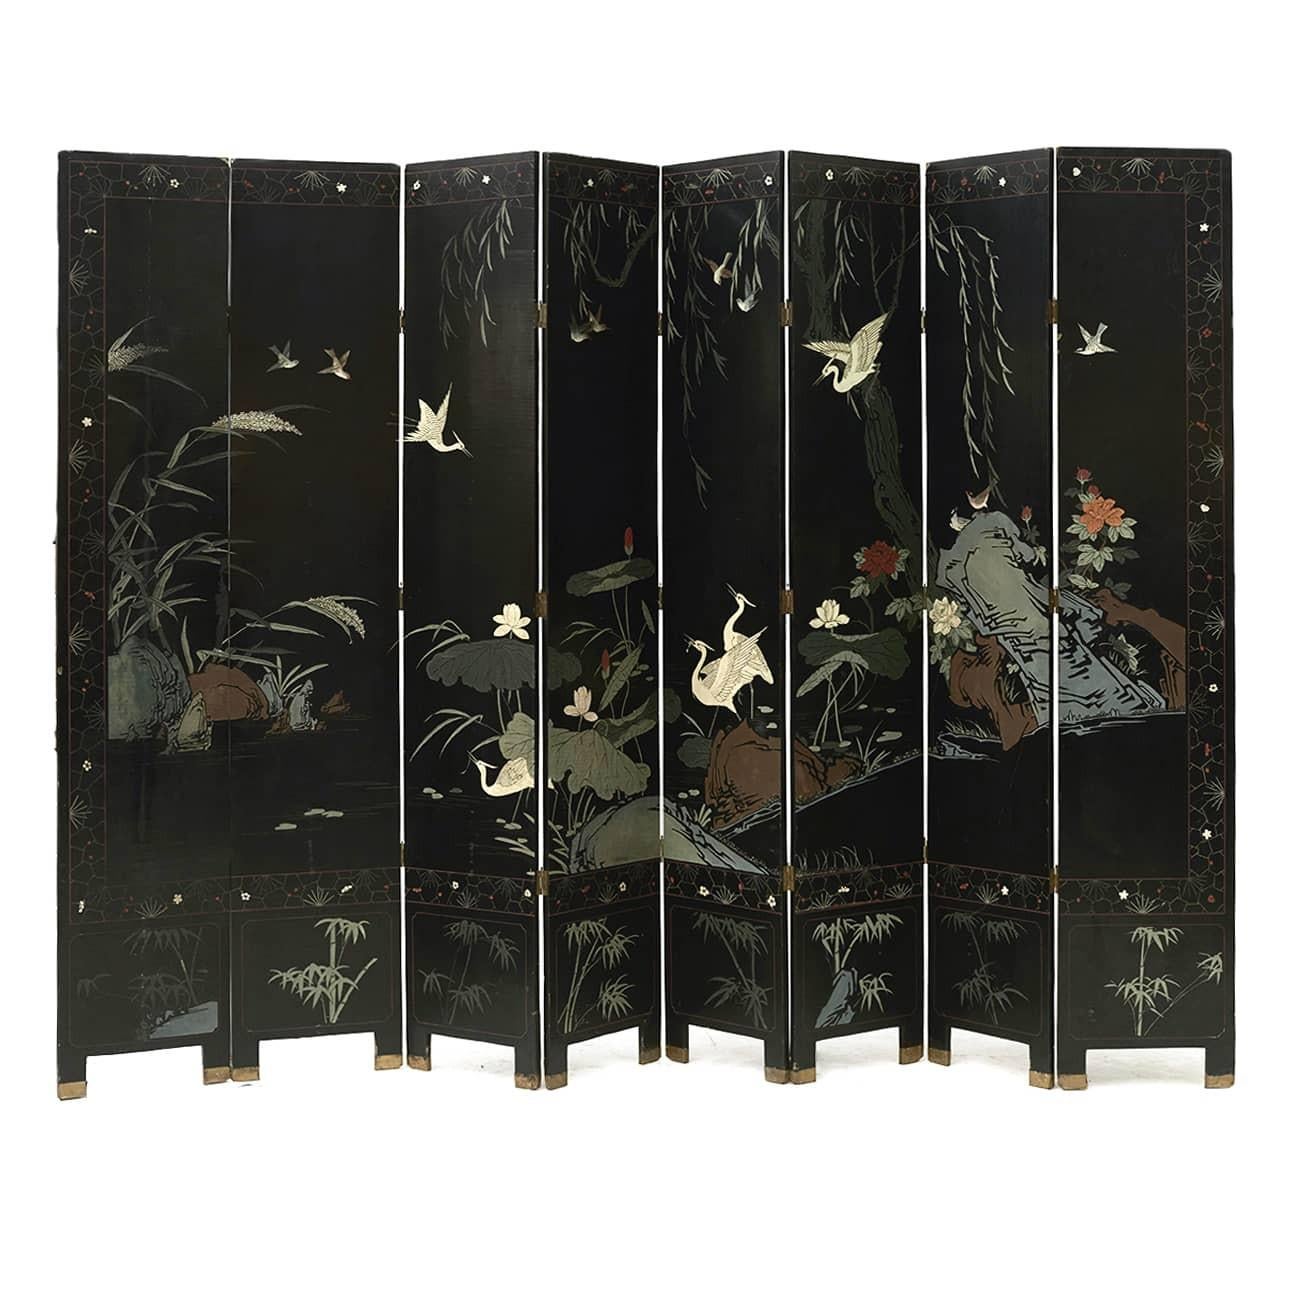 An amazing Chinese export eight-panel black lacquered screen.
The screen features 8 lacquer incised elm panels. The wood is first applied a thick layer of lacquer and then intricately incised with color pigments and gilt. Beautiful